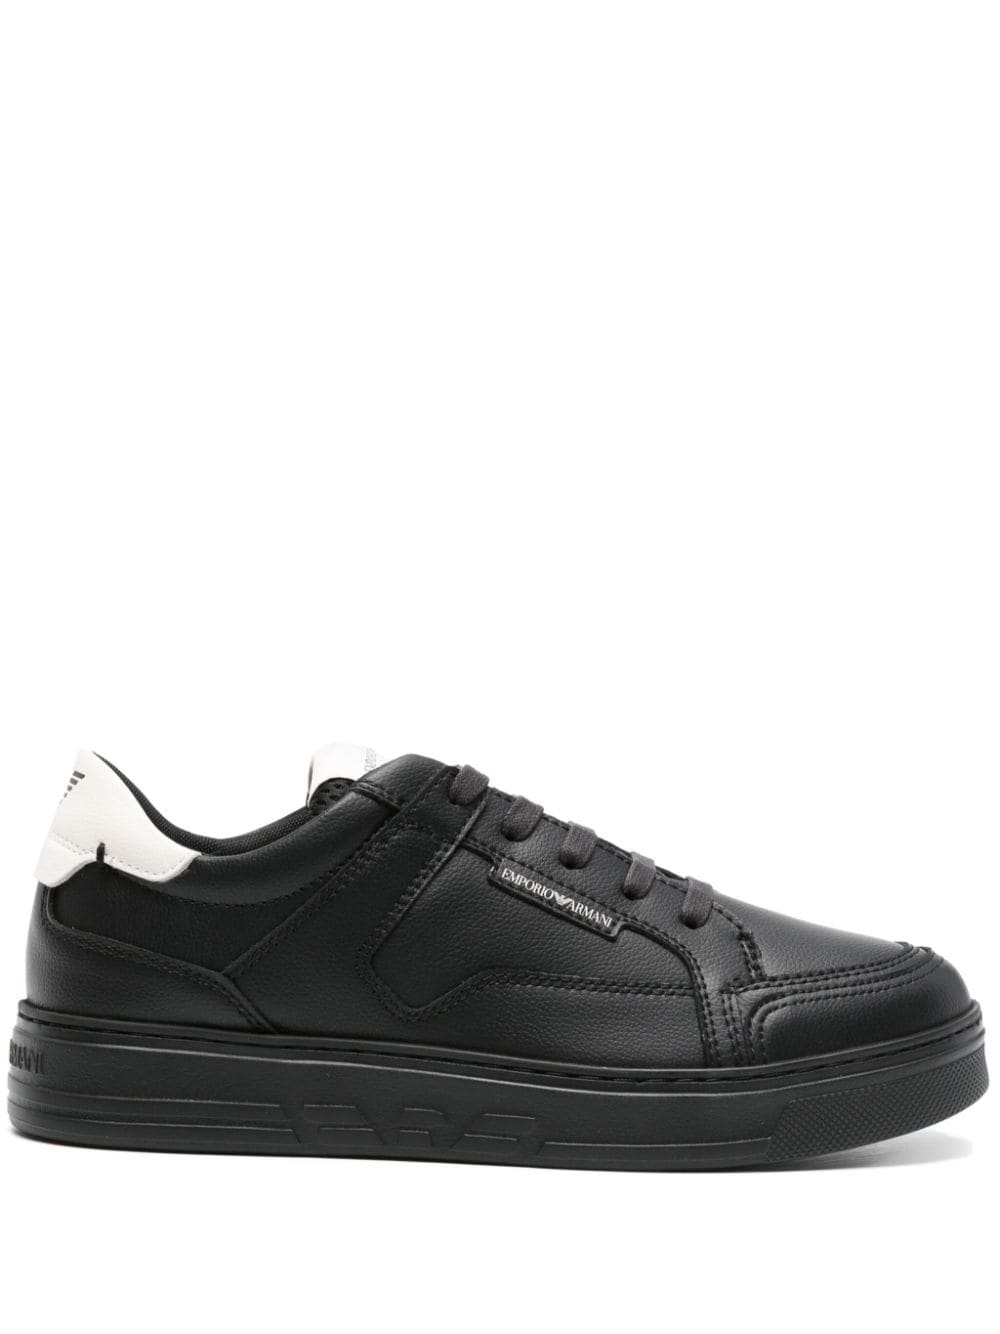 Emporio Armani Lace-up Leather Sneakers In Black